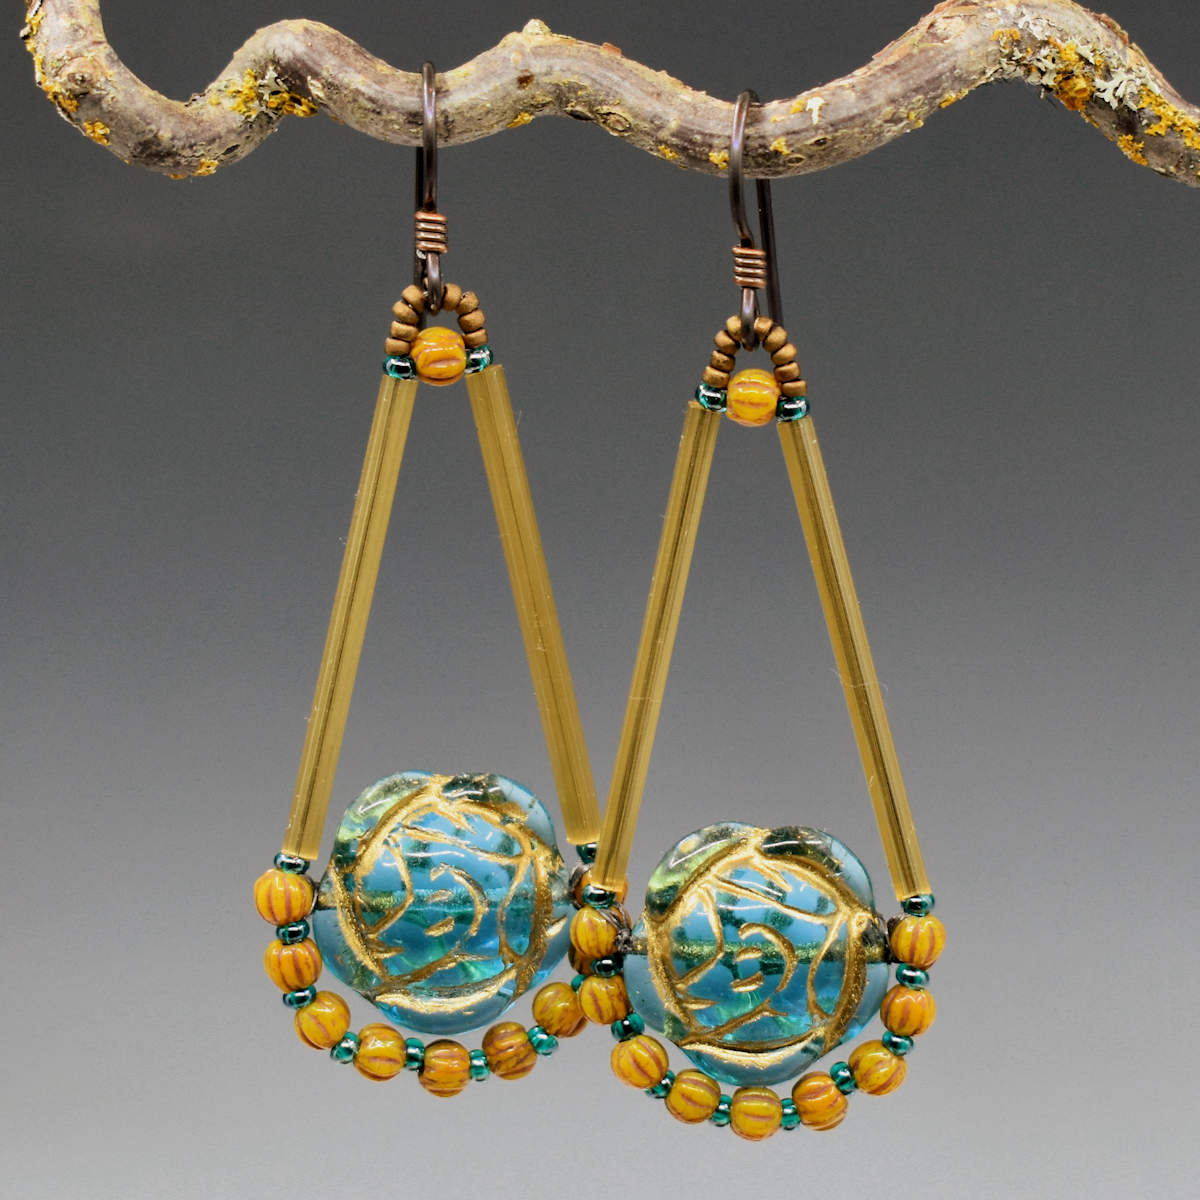 Long gold and aqua teardrop shaped earrings with dark ear wires hang from a lichen covered twig. The teardrop's widest part holds a transparent aqua rose beads with gold details.  The outline of the teardrop shape is formed from gold satin glass tubes with a swag of dandelion melon beads forming the bottom curve.. 